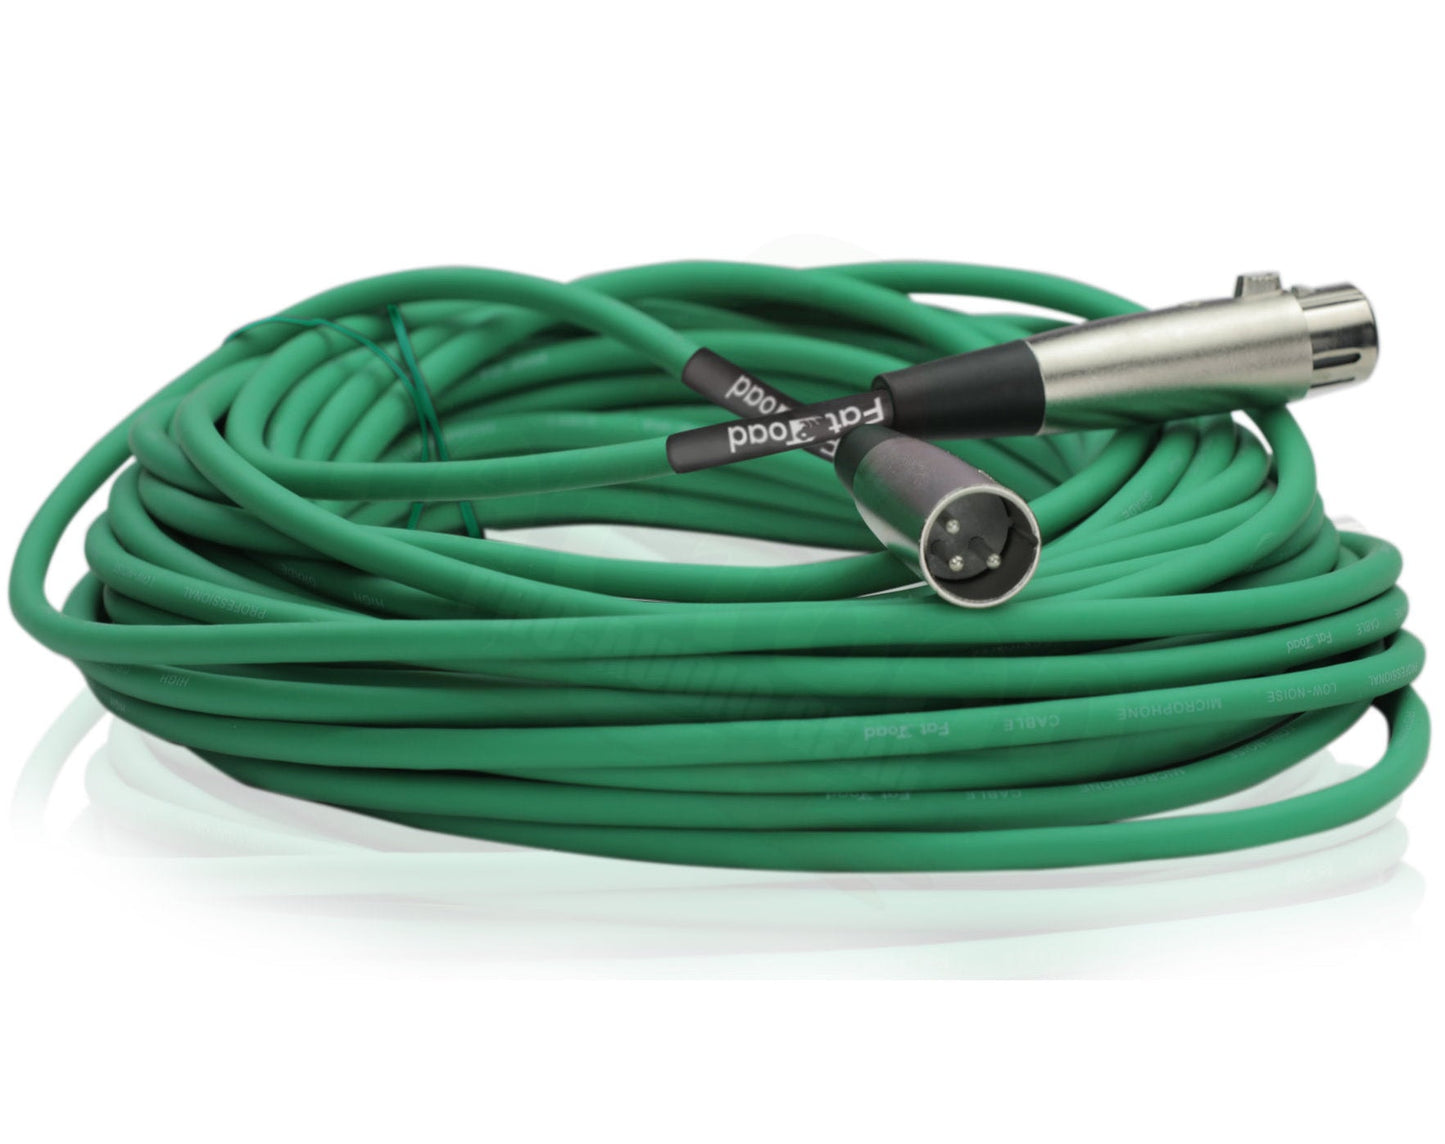 XLR Microphone Cables (2 Pack) by FAT TOAD - 50ft Pro Audio Green Mic Cord Patch Extension & Male to Female Lo-Z Connector - 24 AWG Shielded Wire